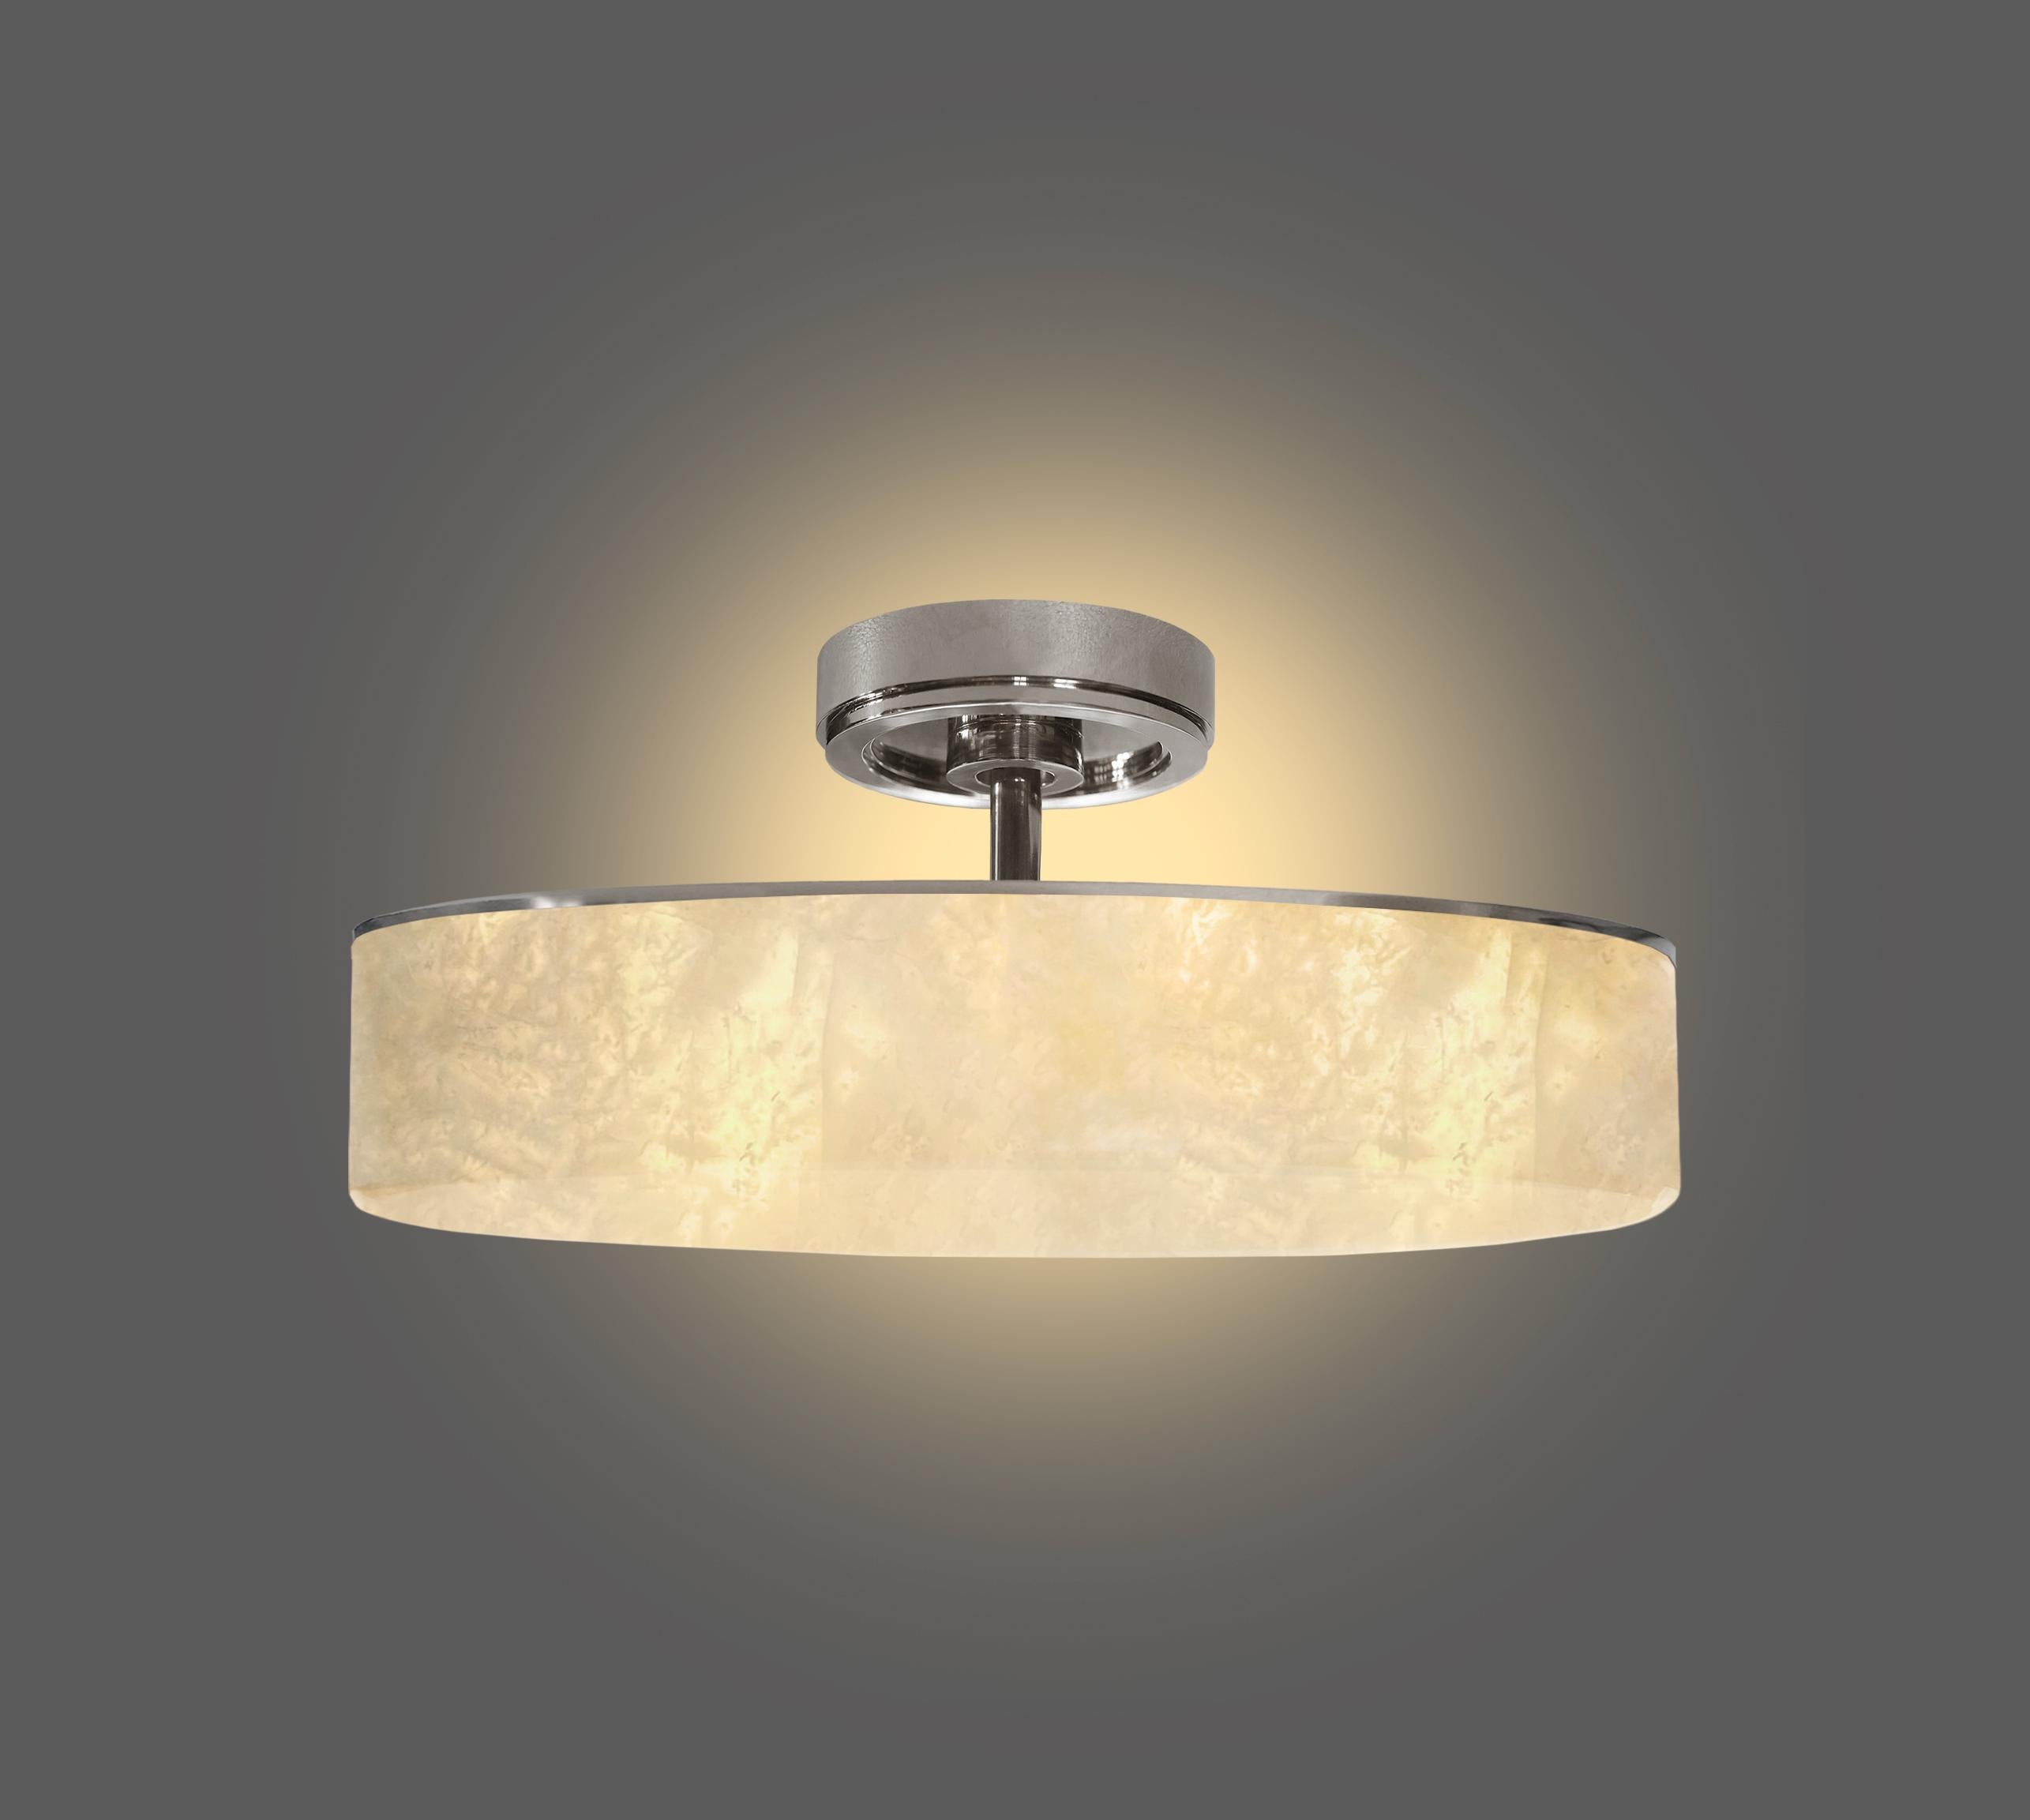 A rock crystal semi flush mount by Phoenix   Polished nickel finish.  Three E12 socket installed,180w total   Custom size and metal finish upon request